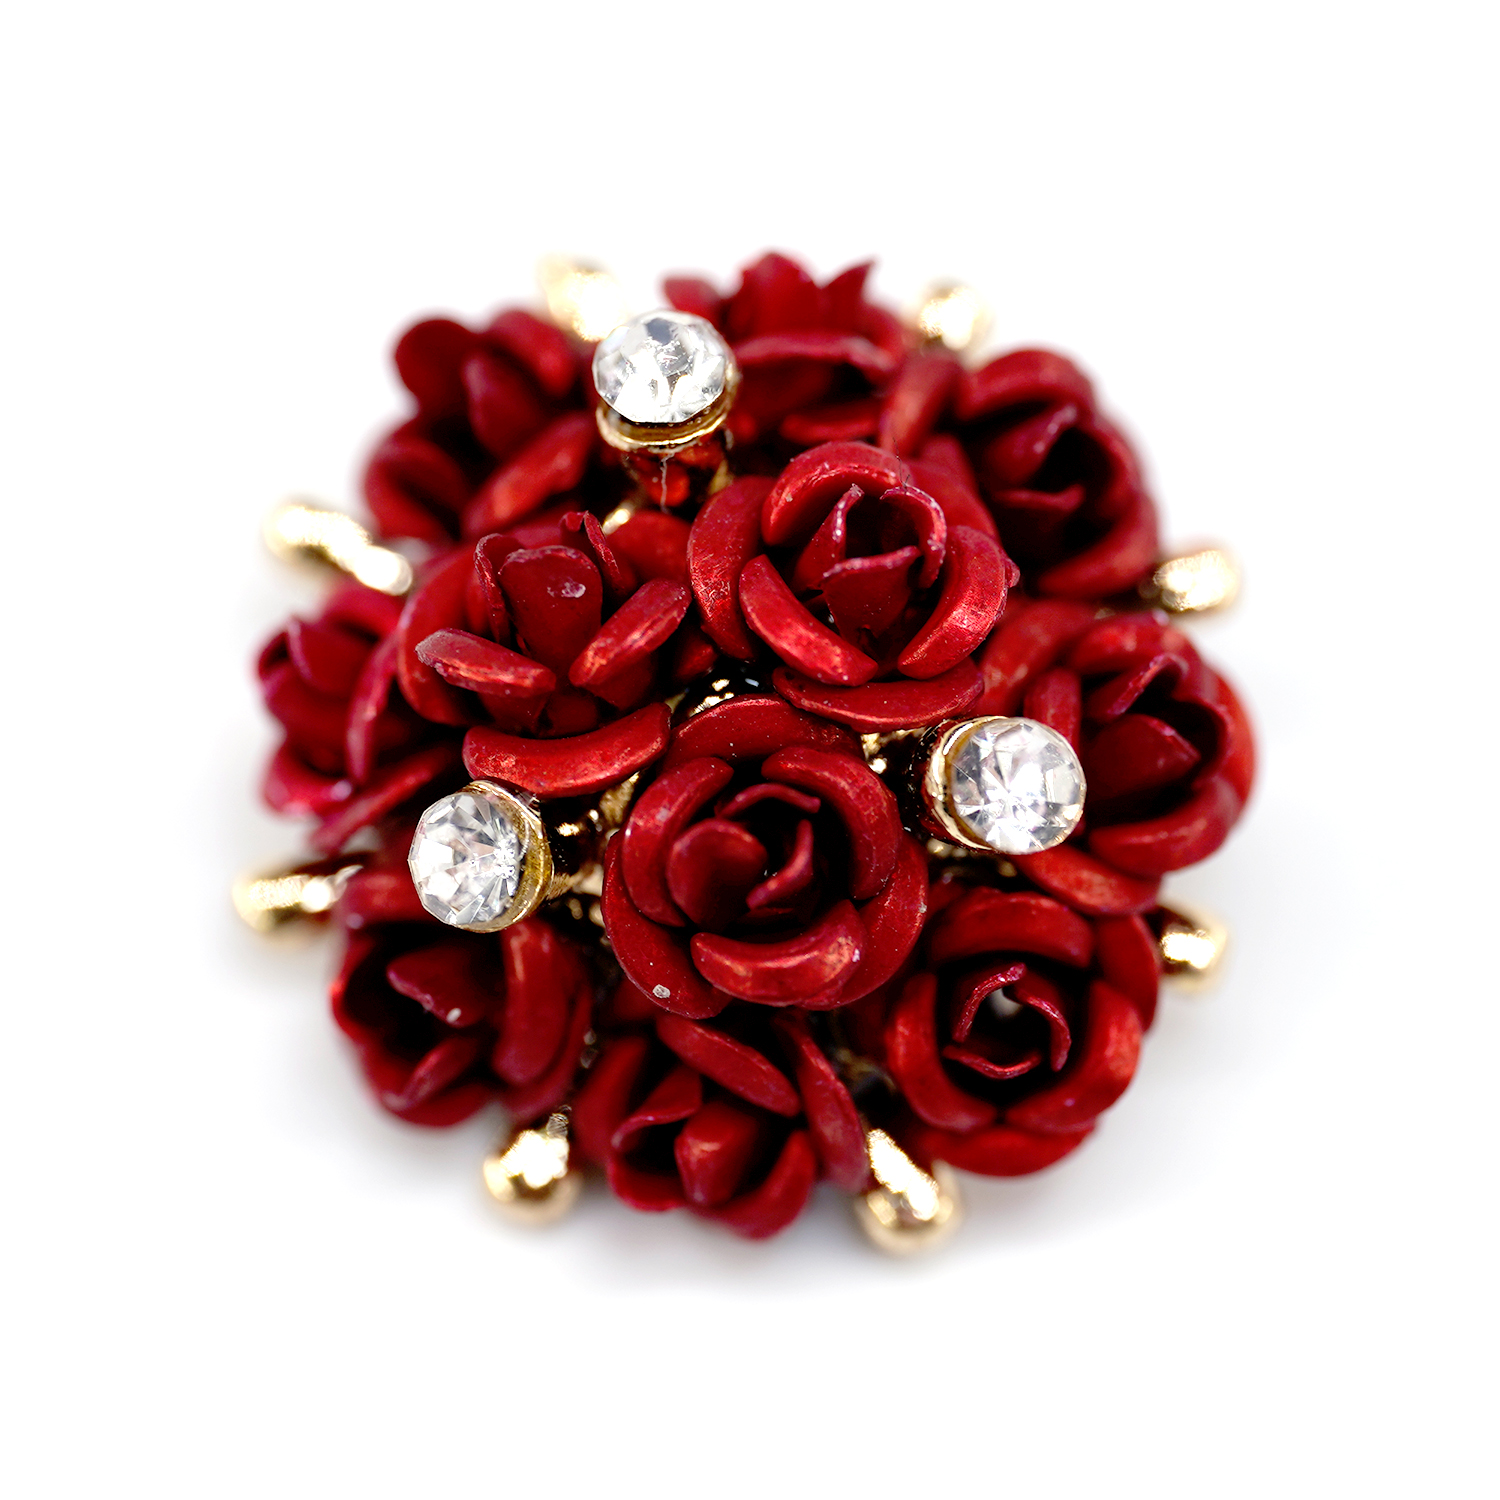 Craftisum 20 pcs Red Metal Rose Bouquet with Shank Sewing Coat Buttons -20mm -13/16"